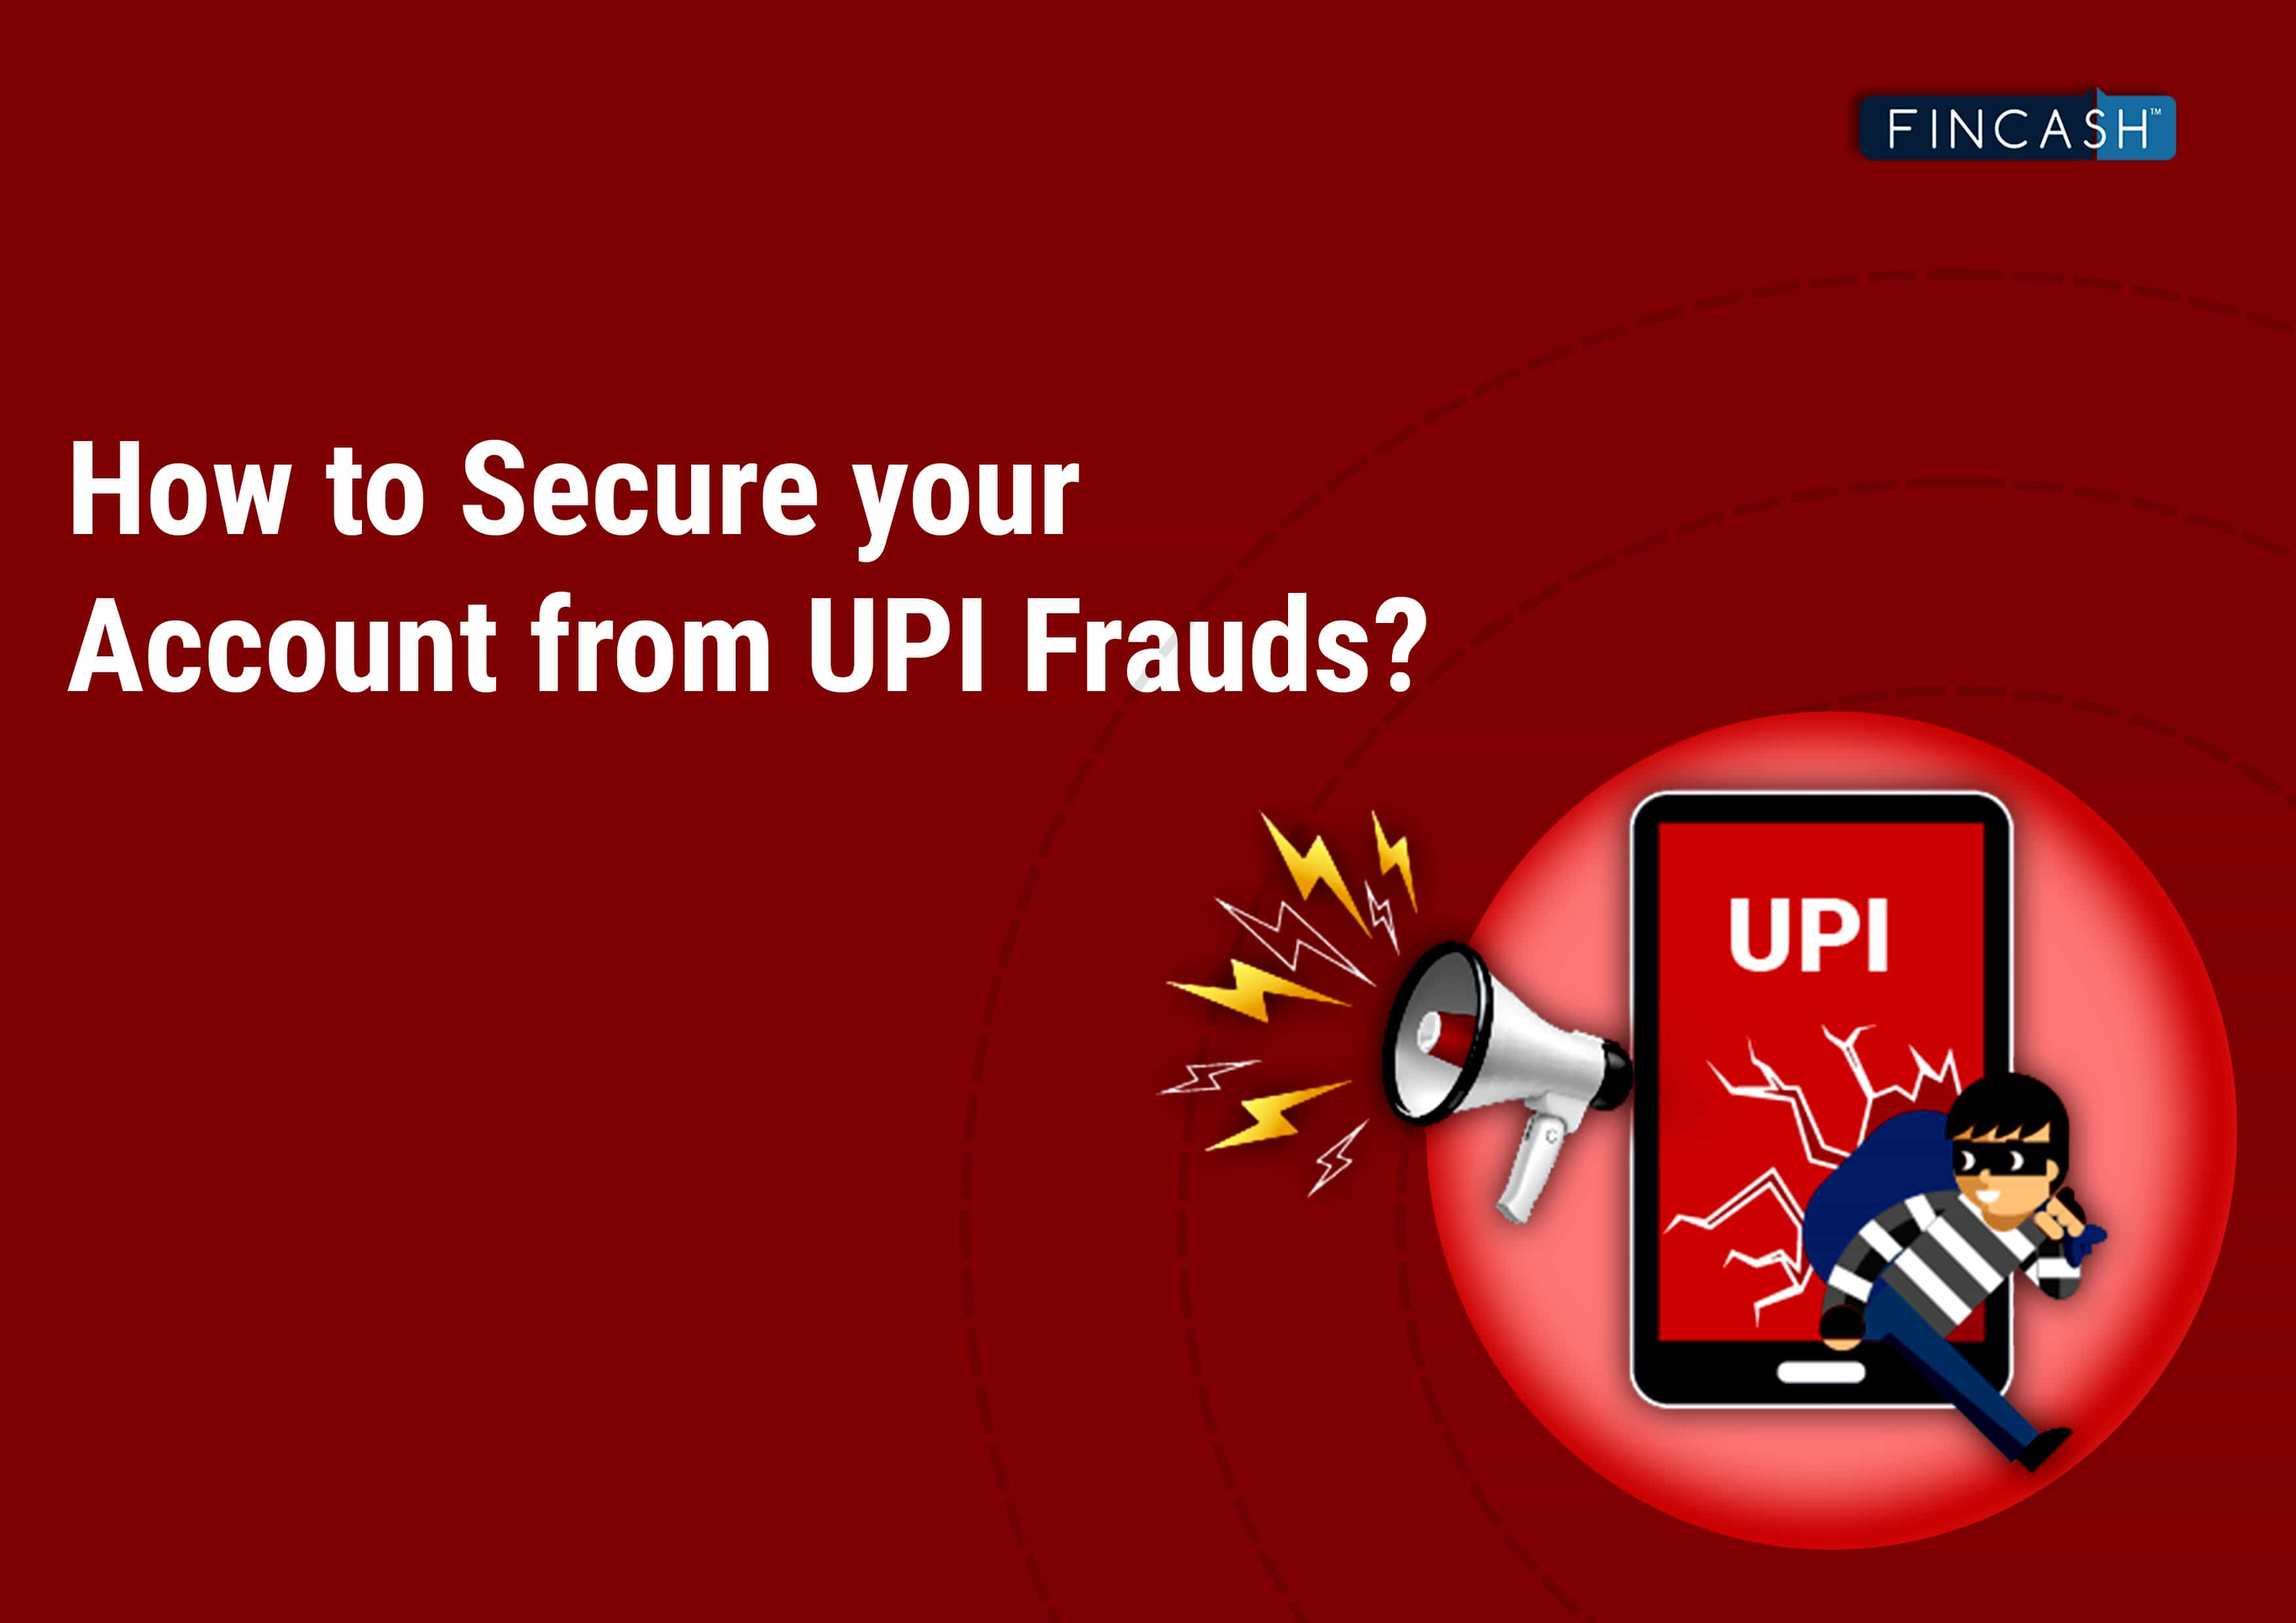 UPI Frauds: How To Secure Your Account From Frauds